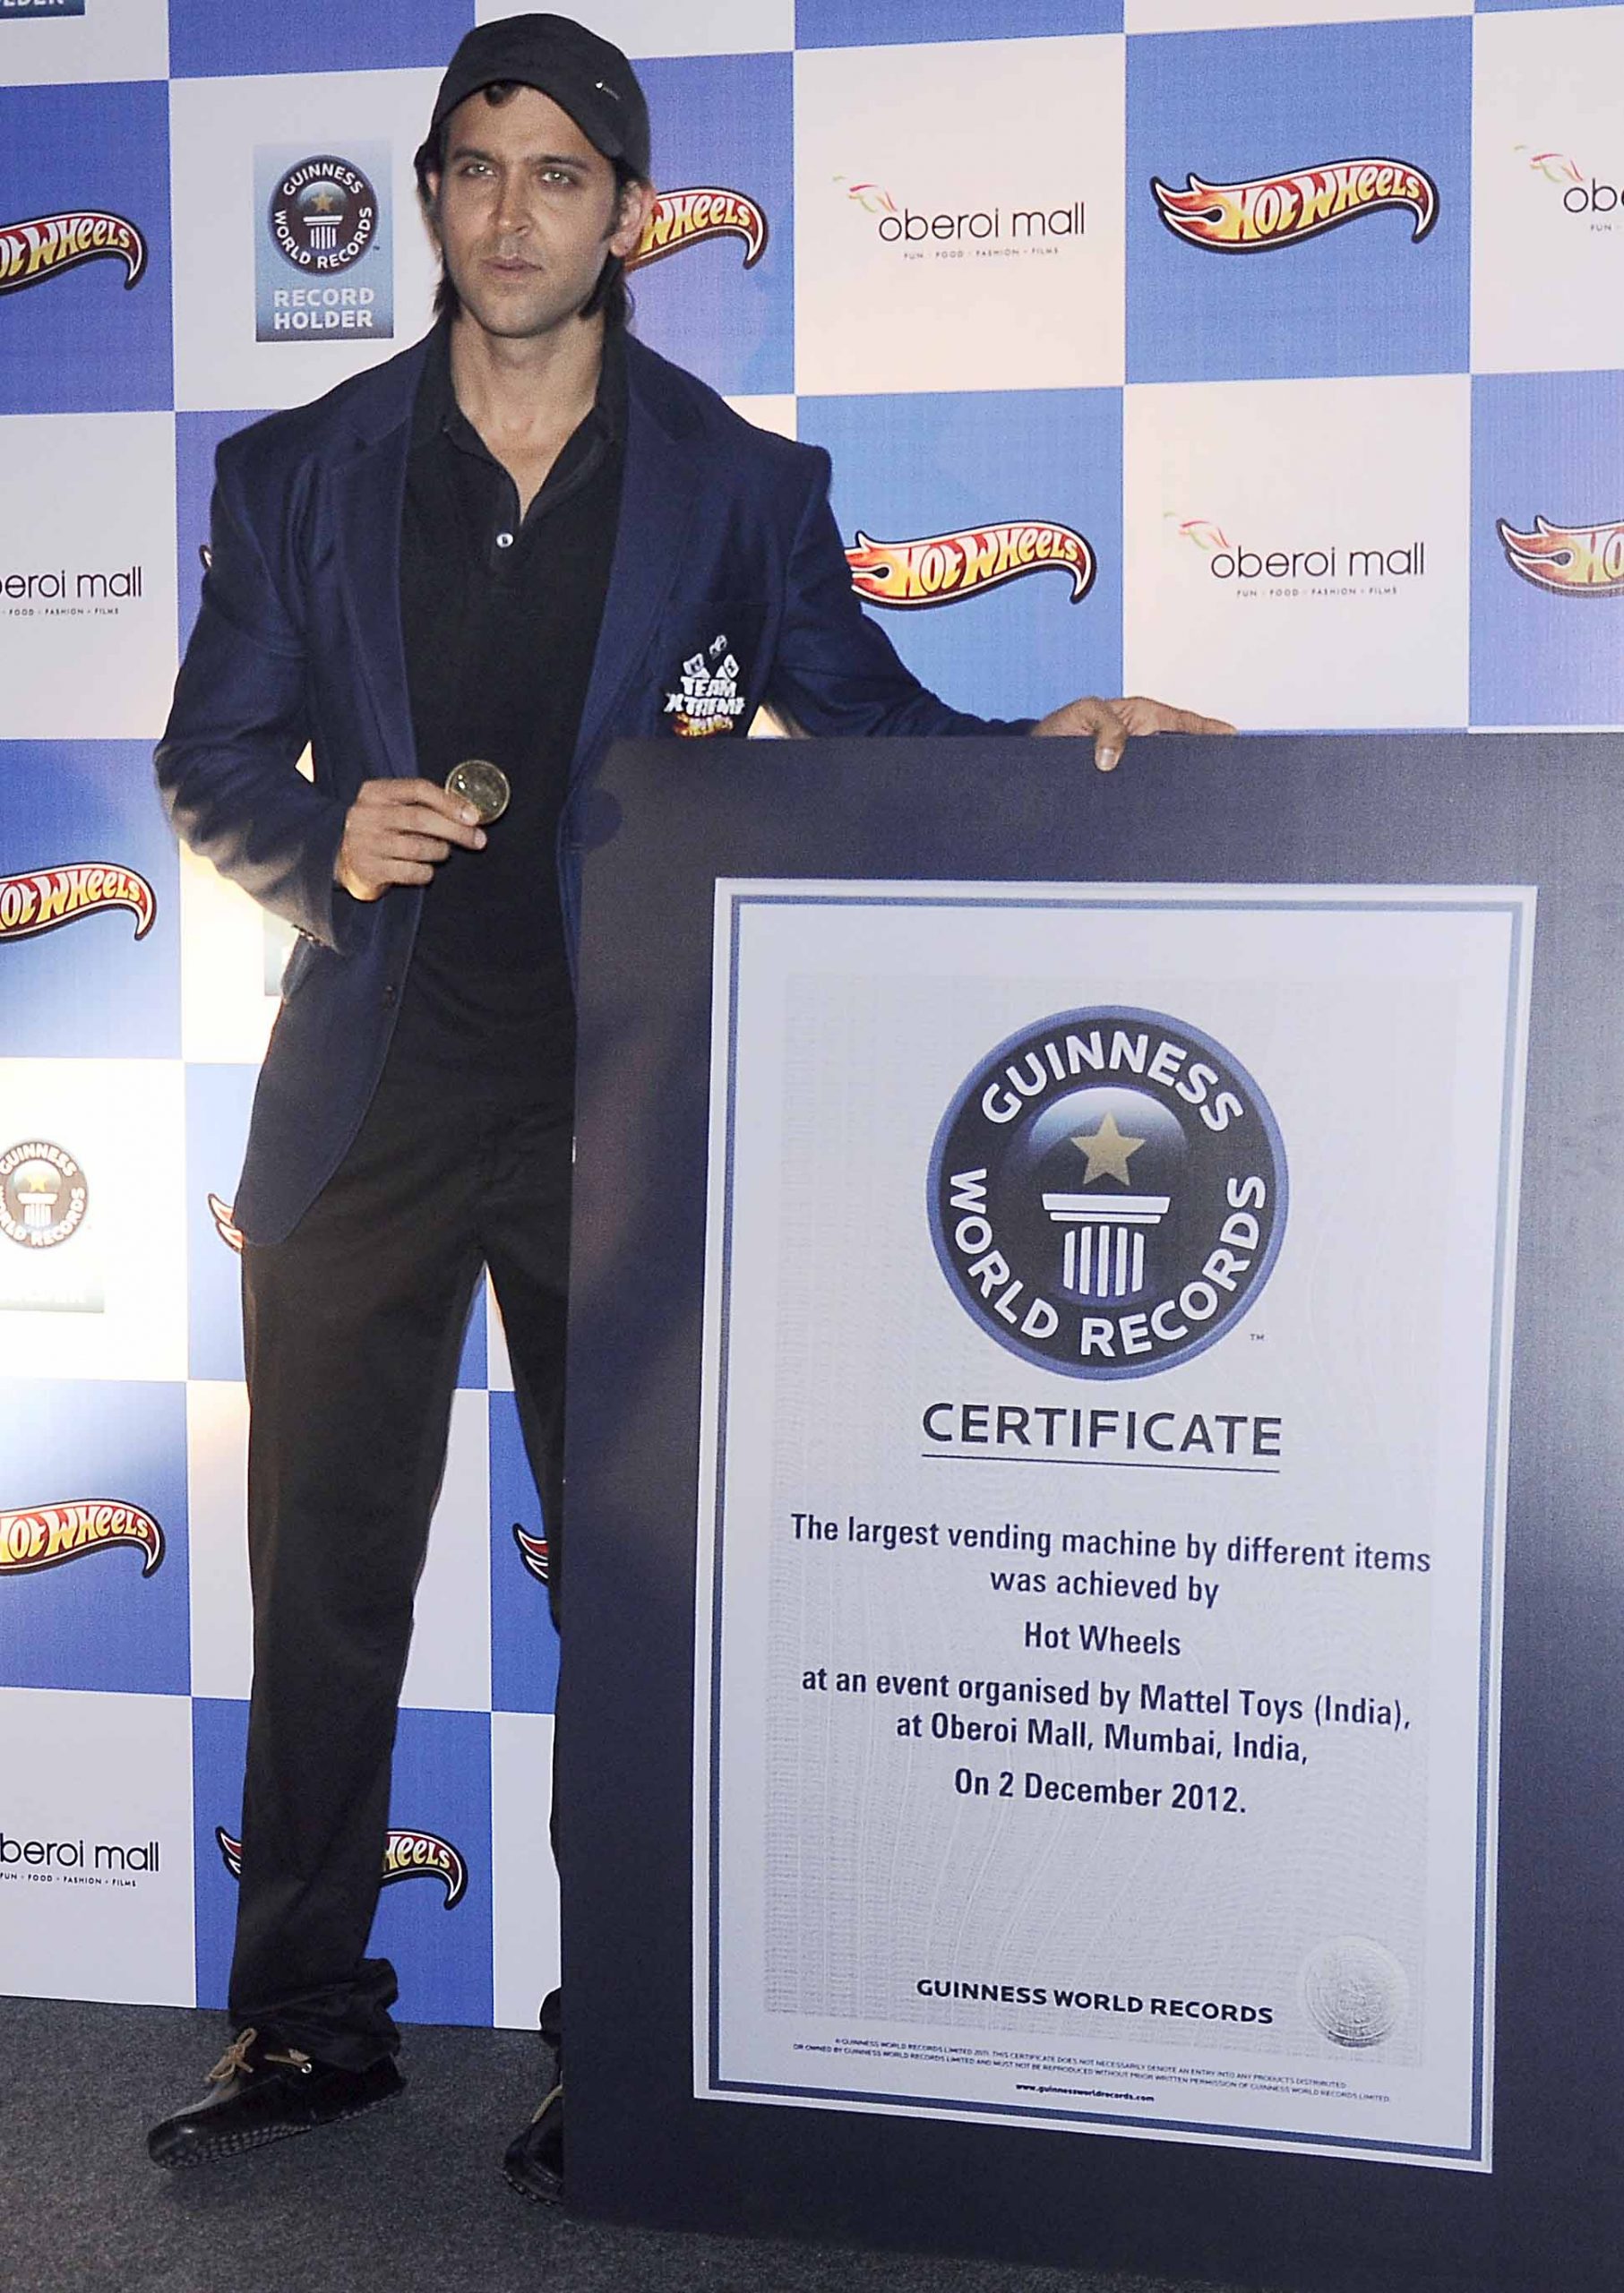 Hrithik Roshan at the unveiling of Hot Wheels' 'Thrill Machine' at Oberoi Mall on December 2, 2012 (Photo courtesy | Yogen Shah)